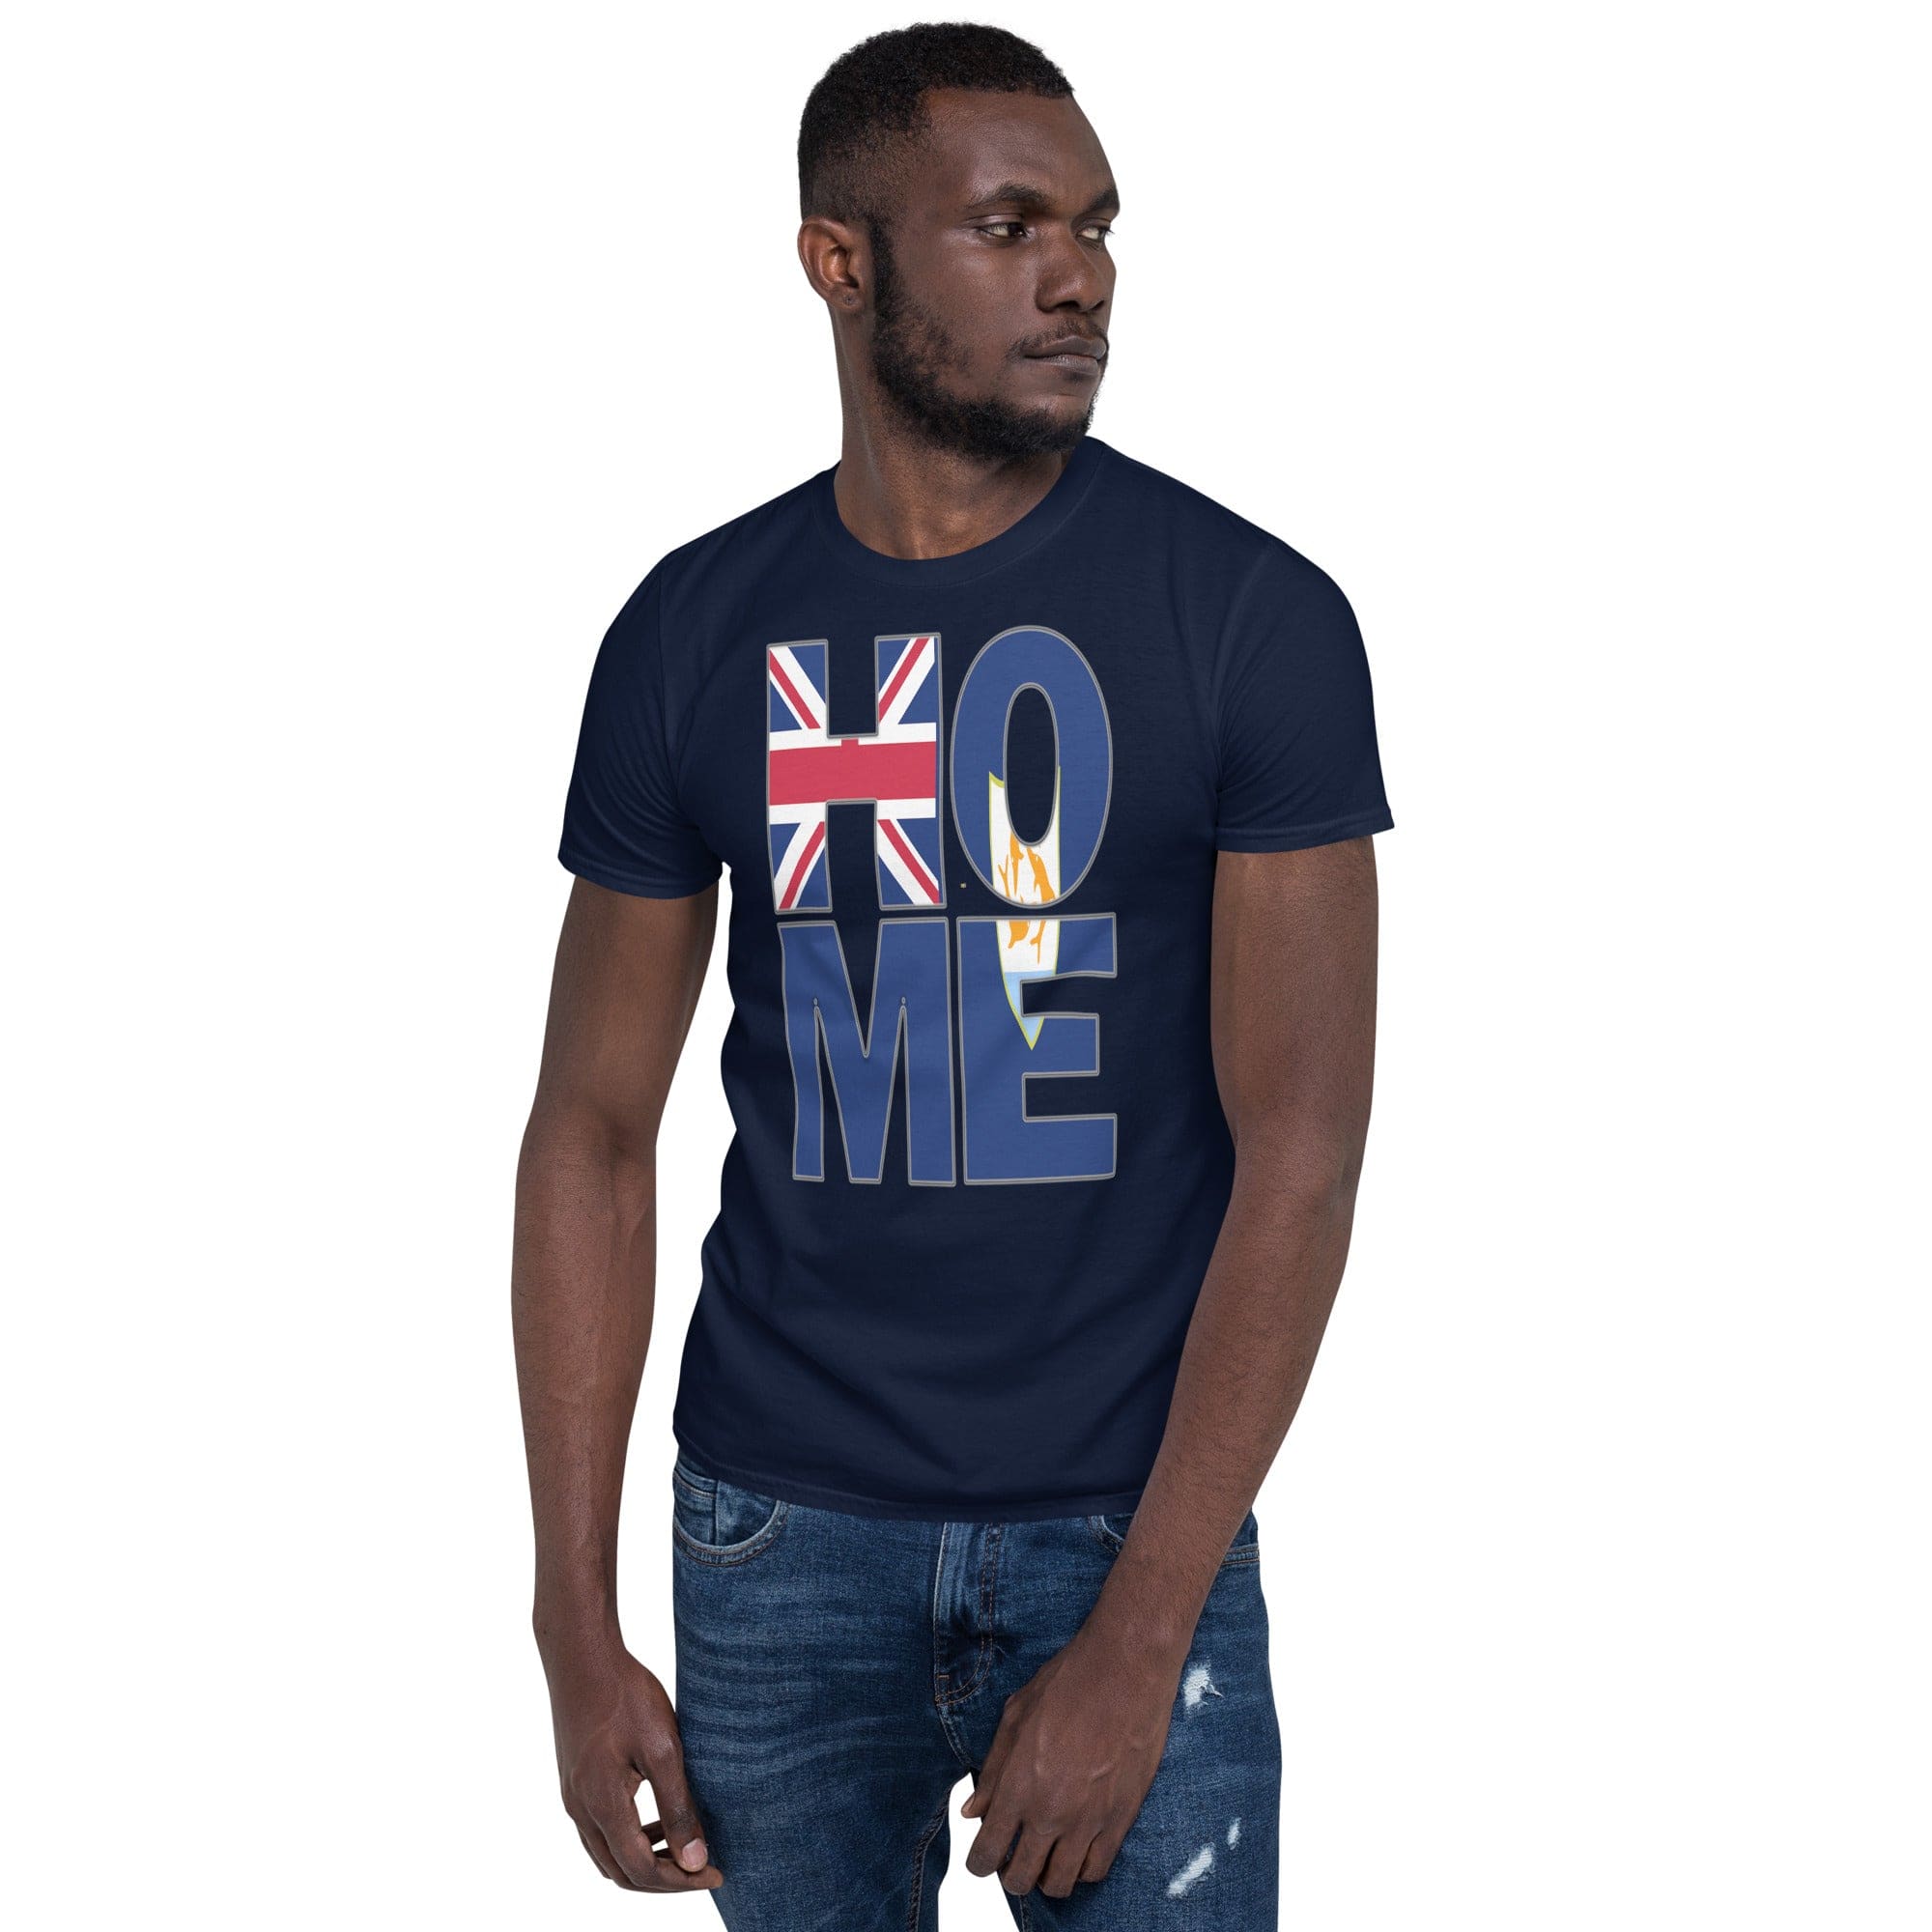 Anguilla flag design in the words HOME on a navy color shirt on the front of a black man.